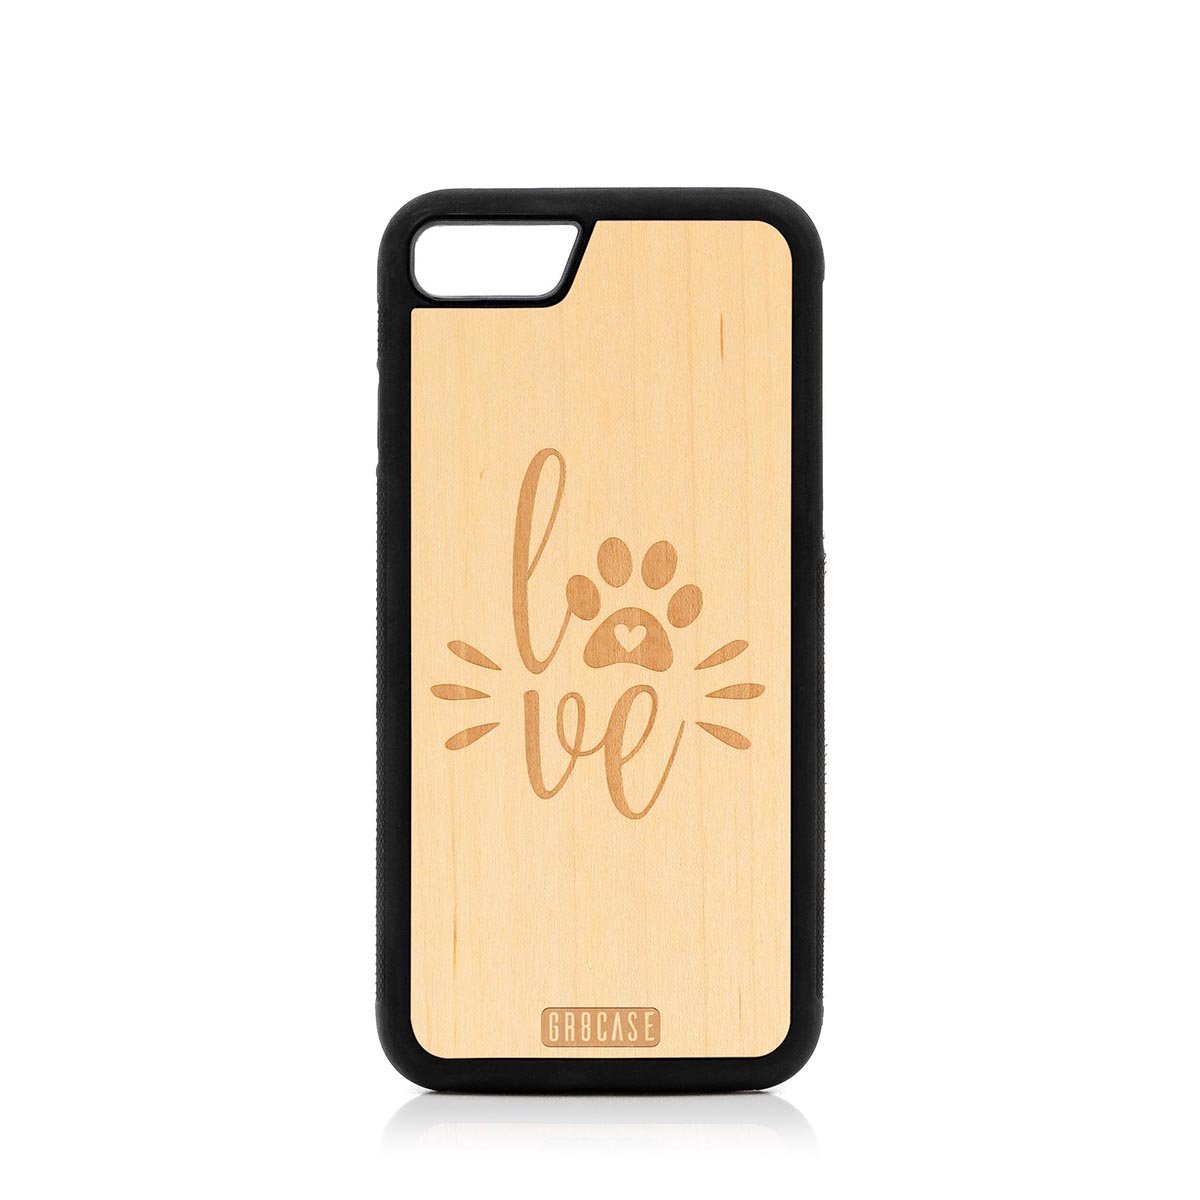 Paw Love Design Wood Case For iPhone SE 2020 by GR8CASE